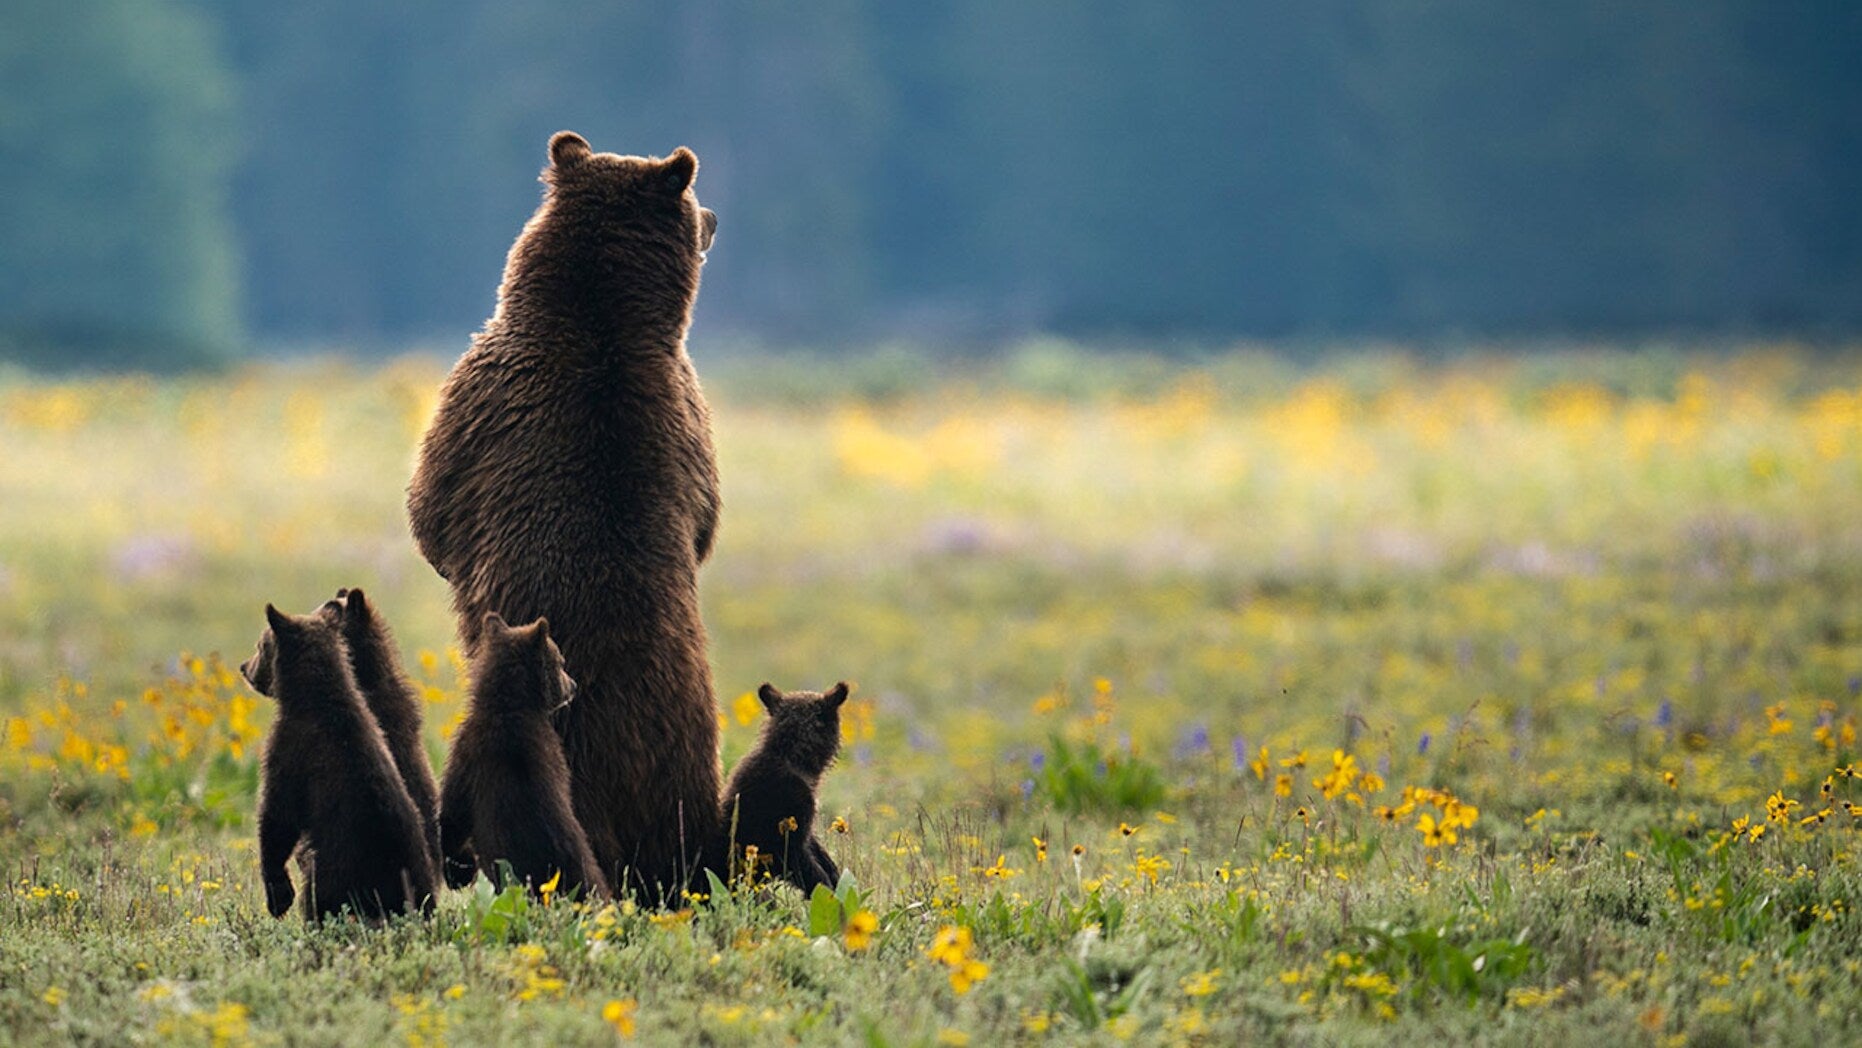 Americans love grizzly bears, but Montana and Wyoming lawmakers are not  getting the message